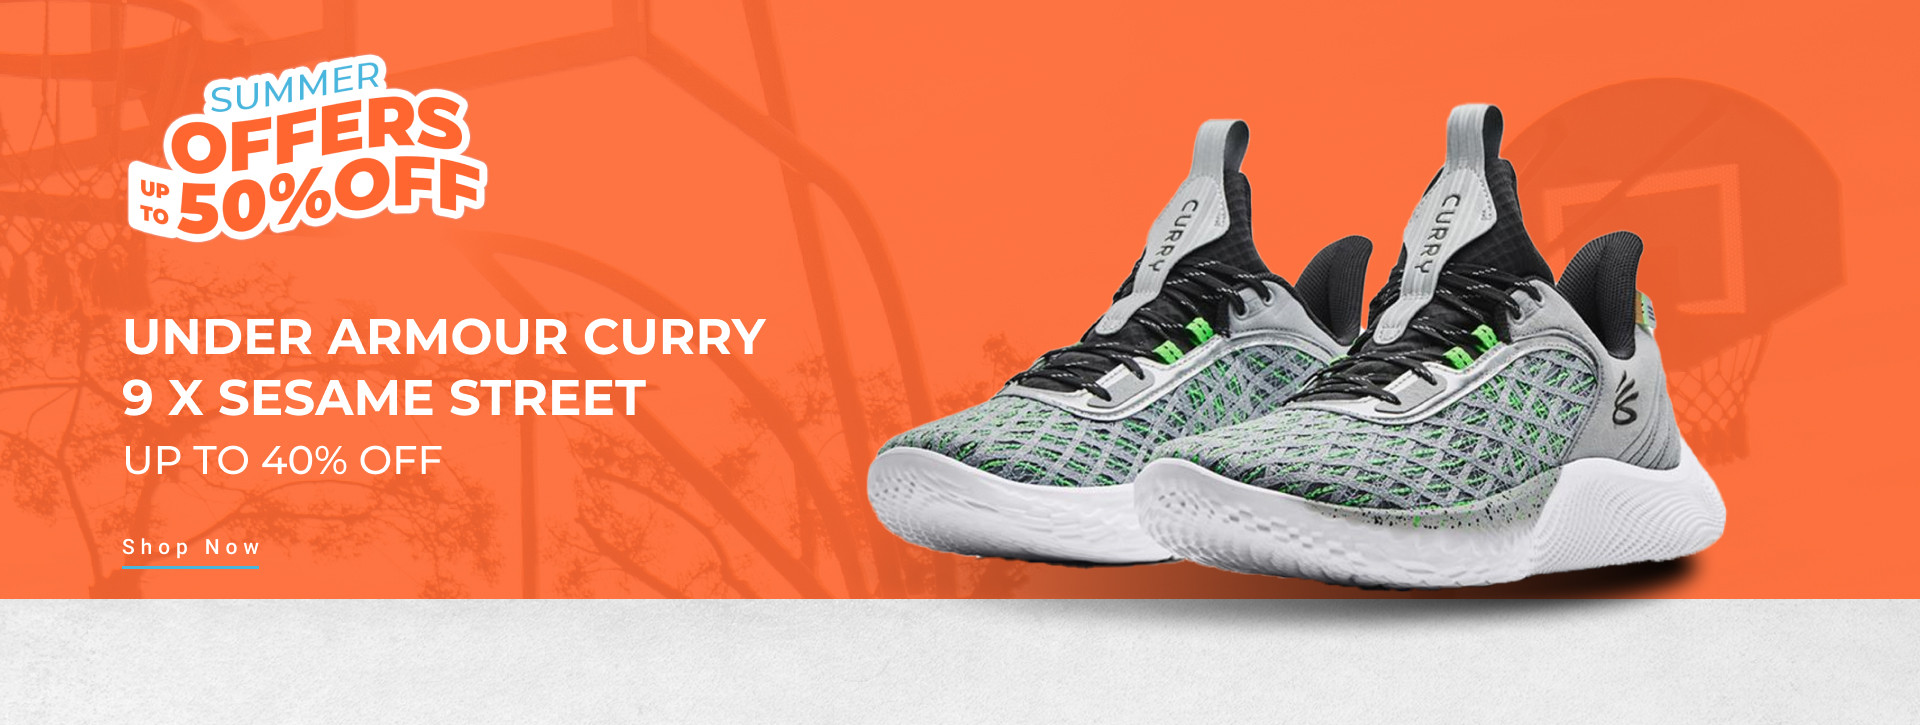 curry9